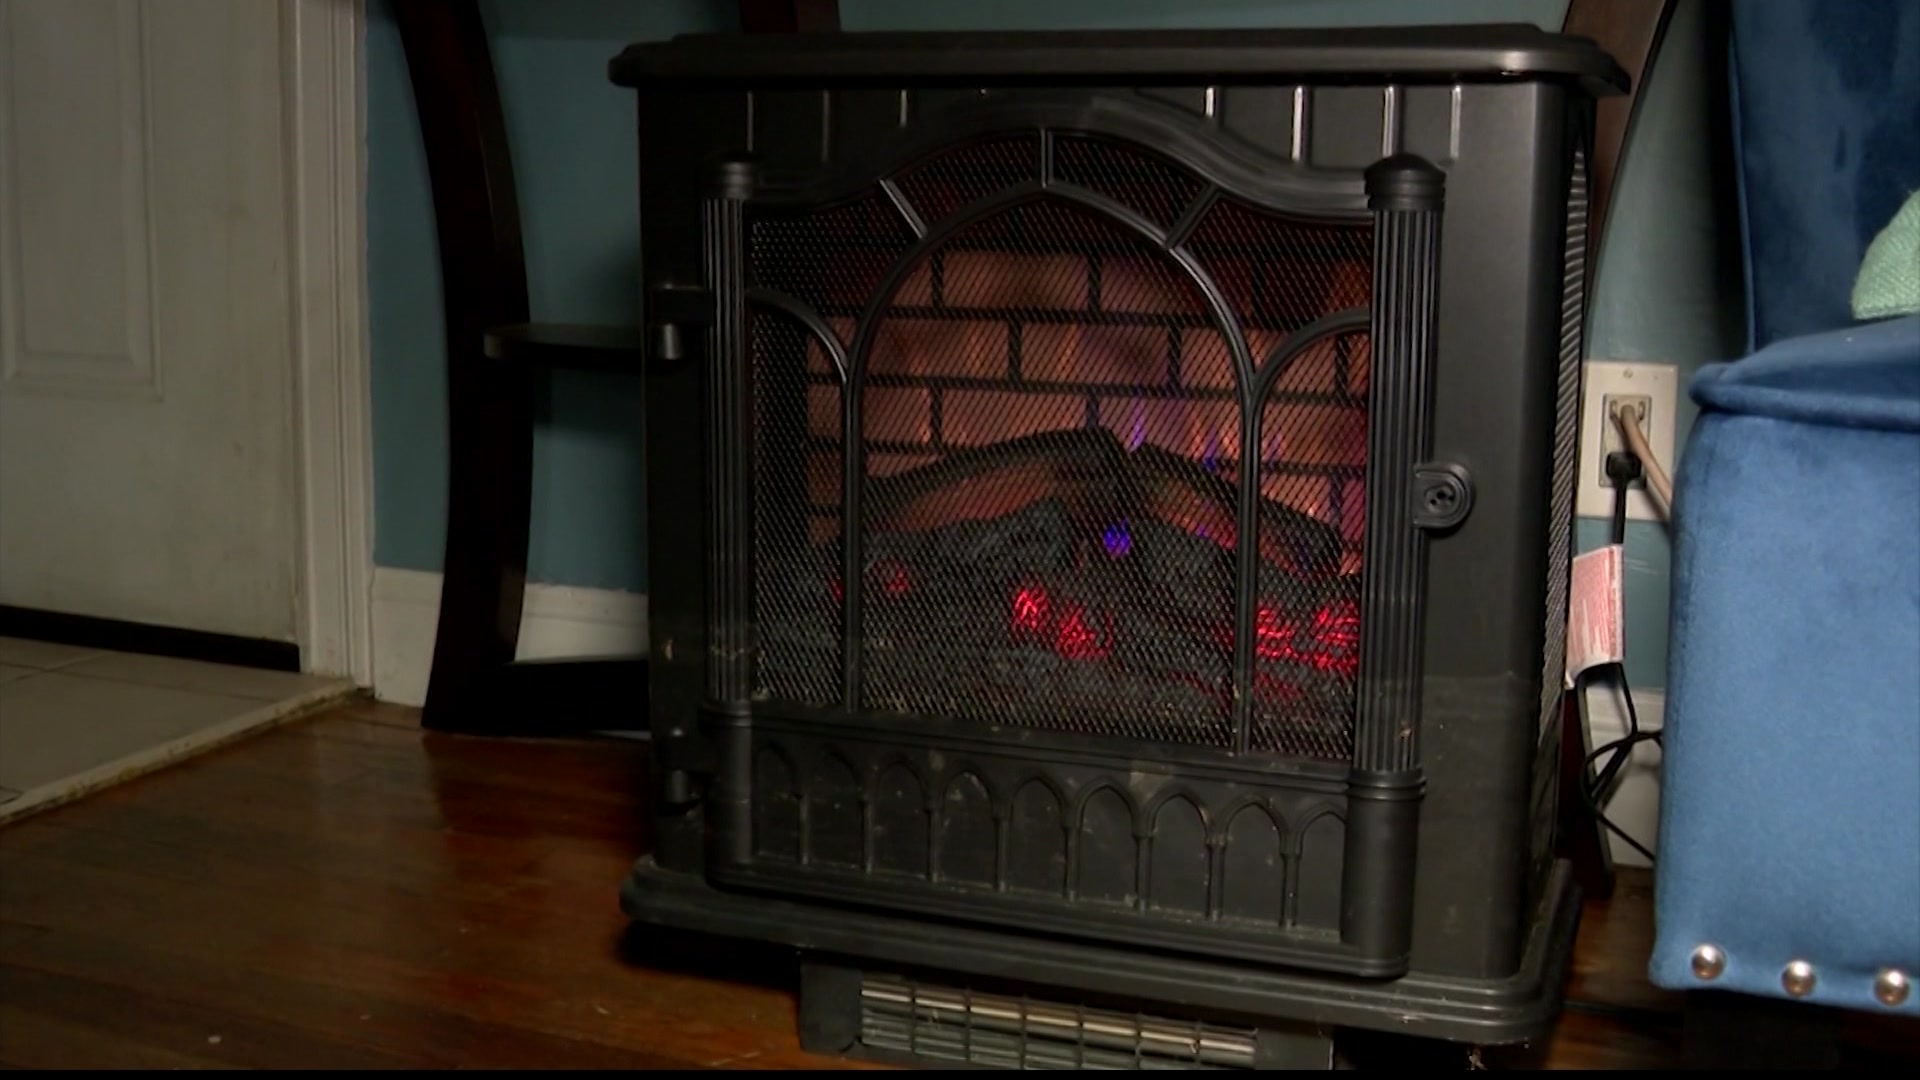 Cortlandt Manor family without heat says heating company won’t fix their furnace